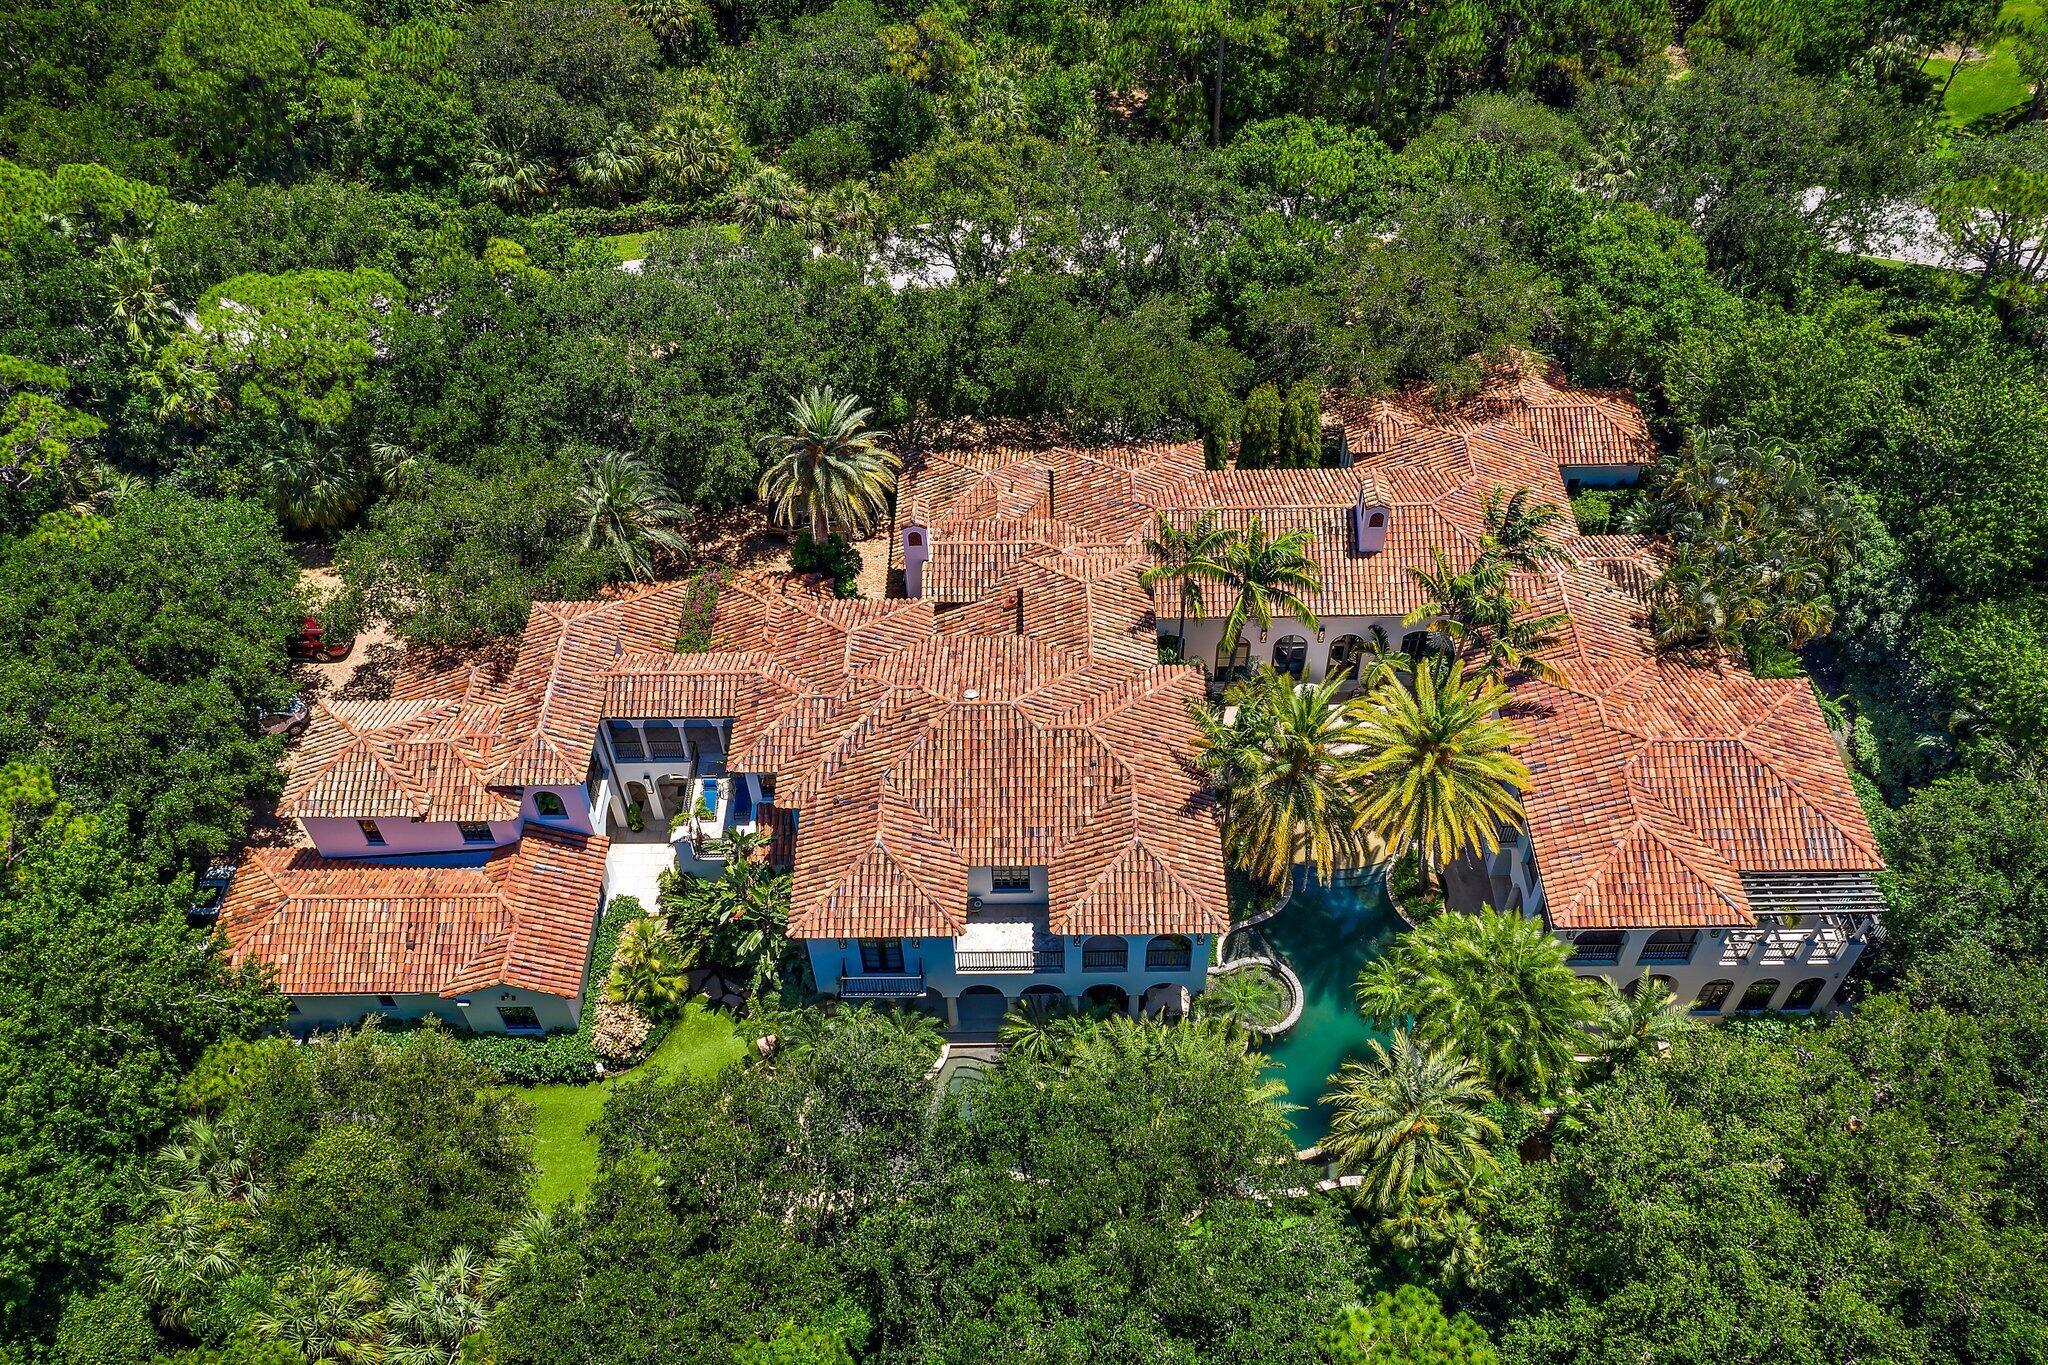 This sprawling Mediterranean Estate sits on 1.25 acres in the heart of The Bear's Club - an ultra exclusive enclave with only 48 estate homes on 369 acres in a park like setting. Renovated in 2019, this home includes amazing amenities like his/her offices; theatre; resort-style pool with grotto; putting green; and 9 garage spaces. Just minutes from the best shopping and dining in Jupiter or the PGA corridor, it's also less than a mile from the Atlantic Ocean.